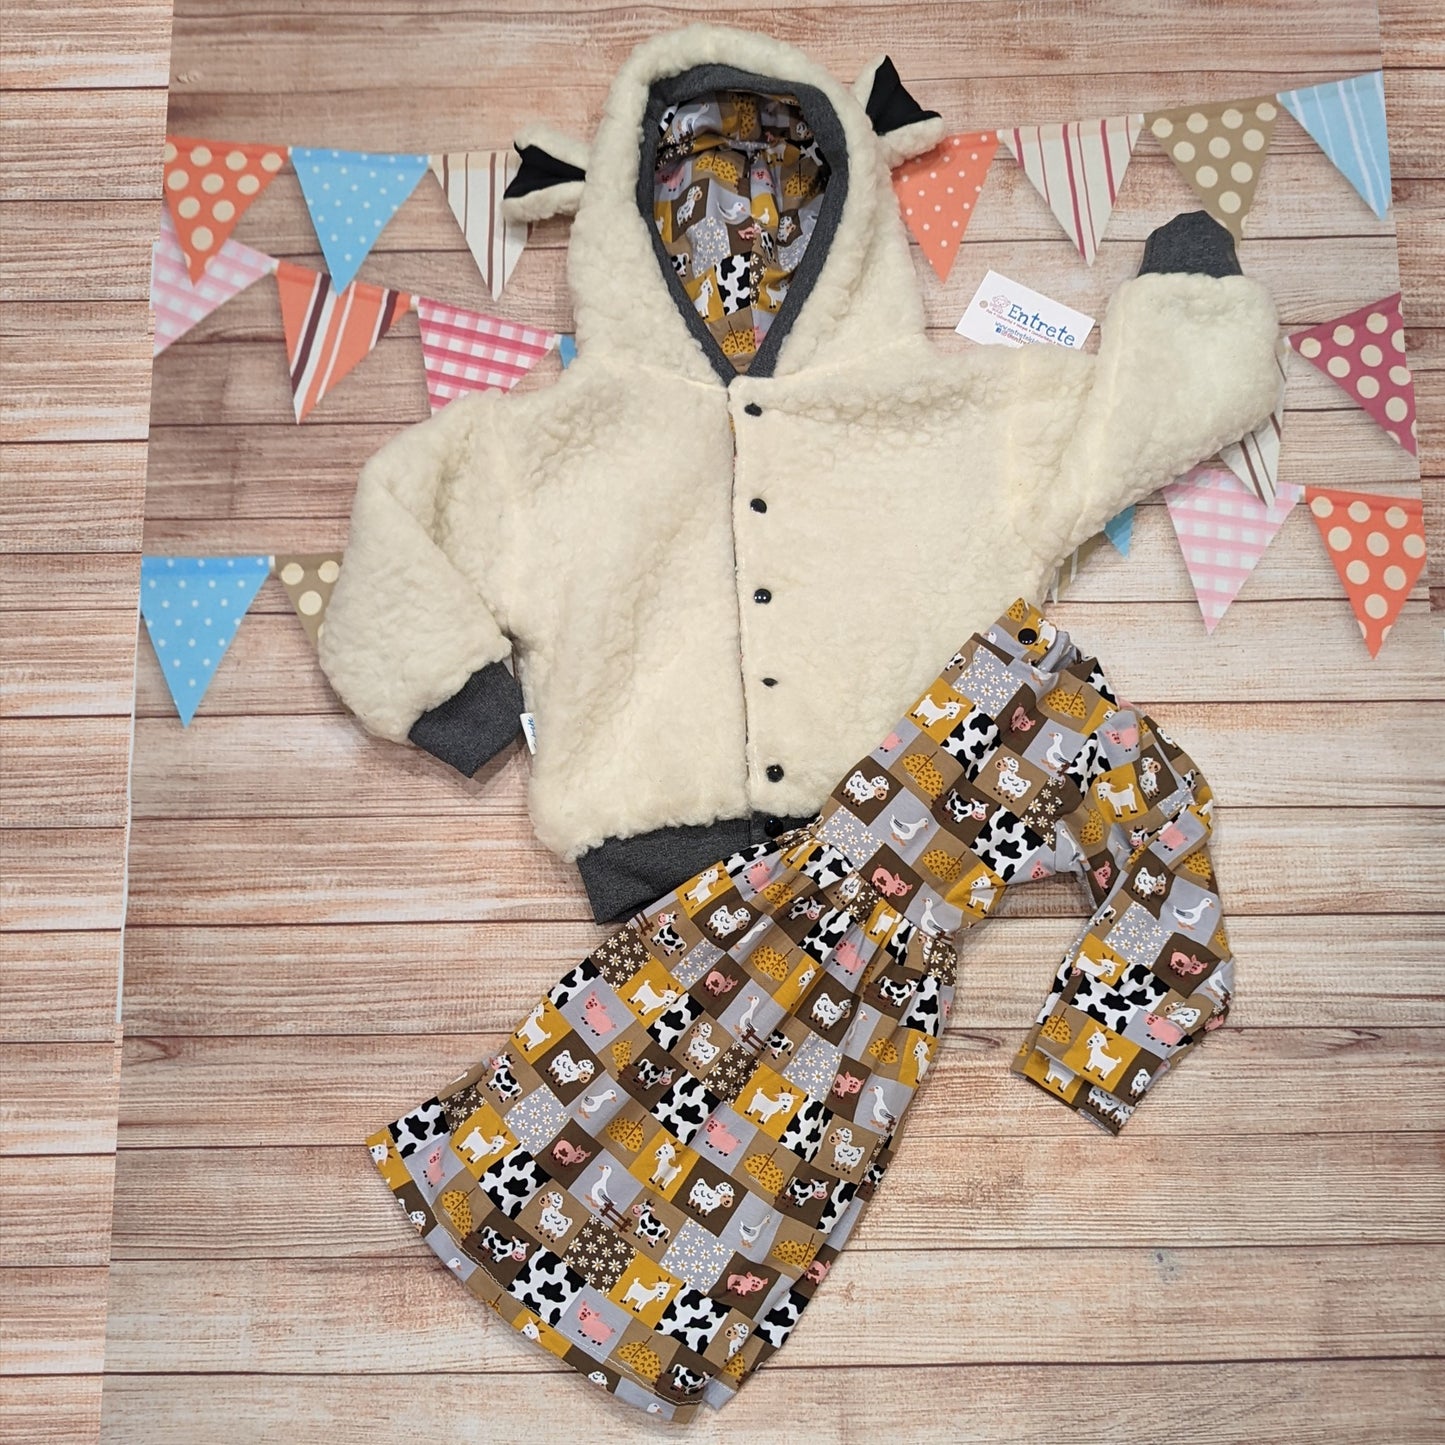 The adorable sheep hoodie handmade using sherpa fur and graphite cotton ribbing, with adorable and fun checkboard farm animals cotton jersey on the reverse. Shown as an outfit with a farm animals dress.